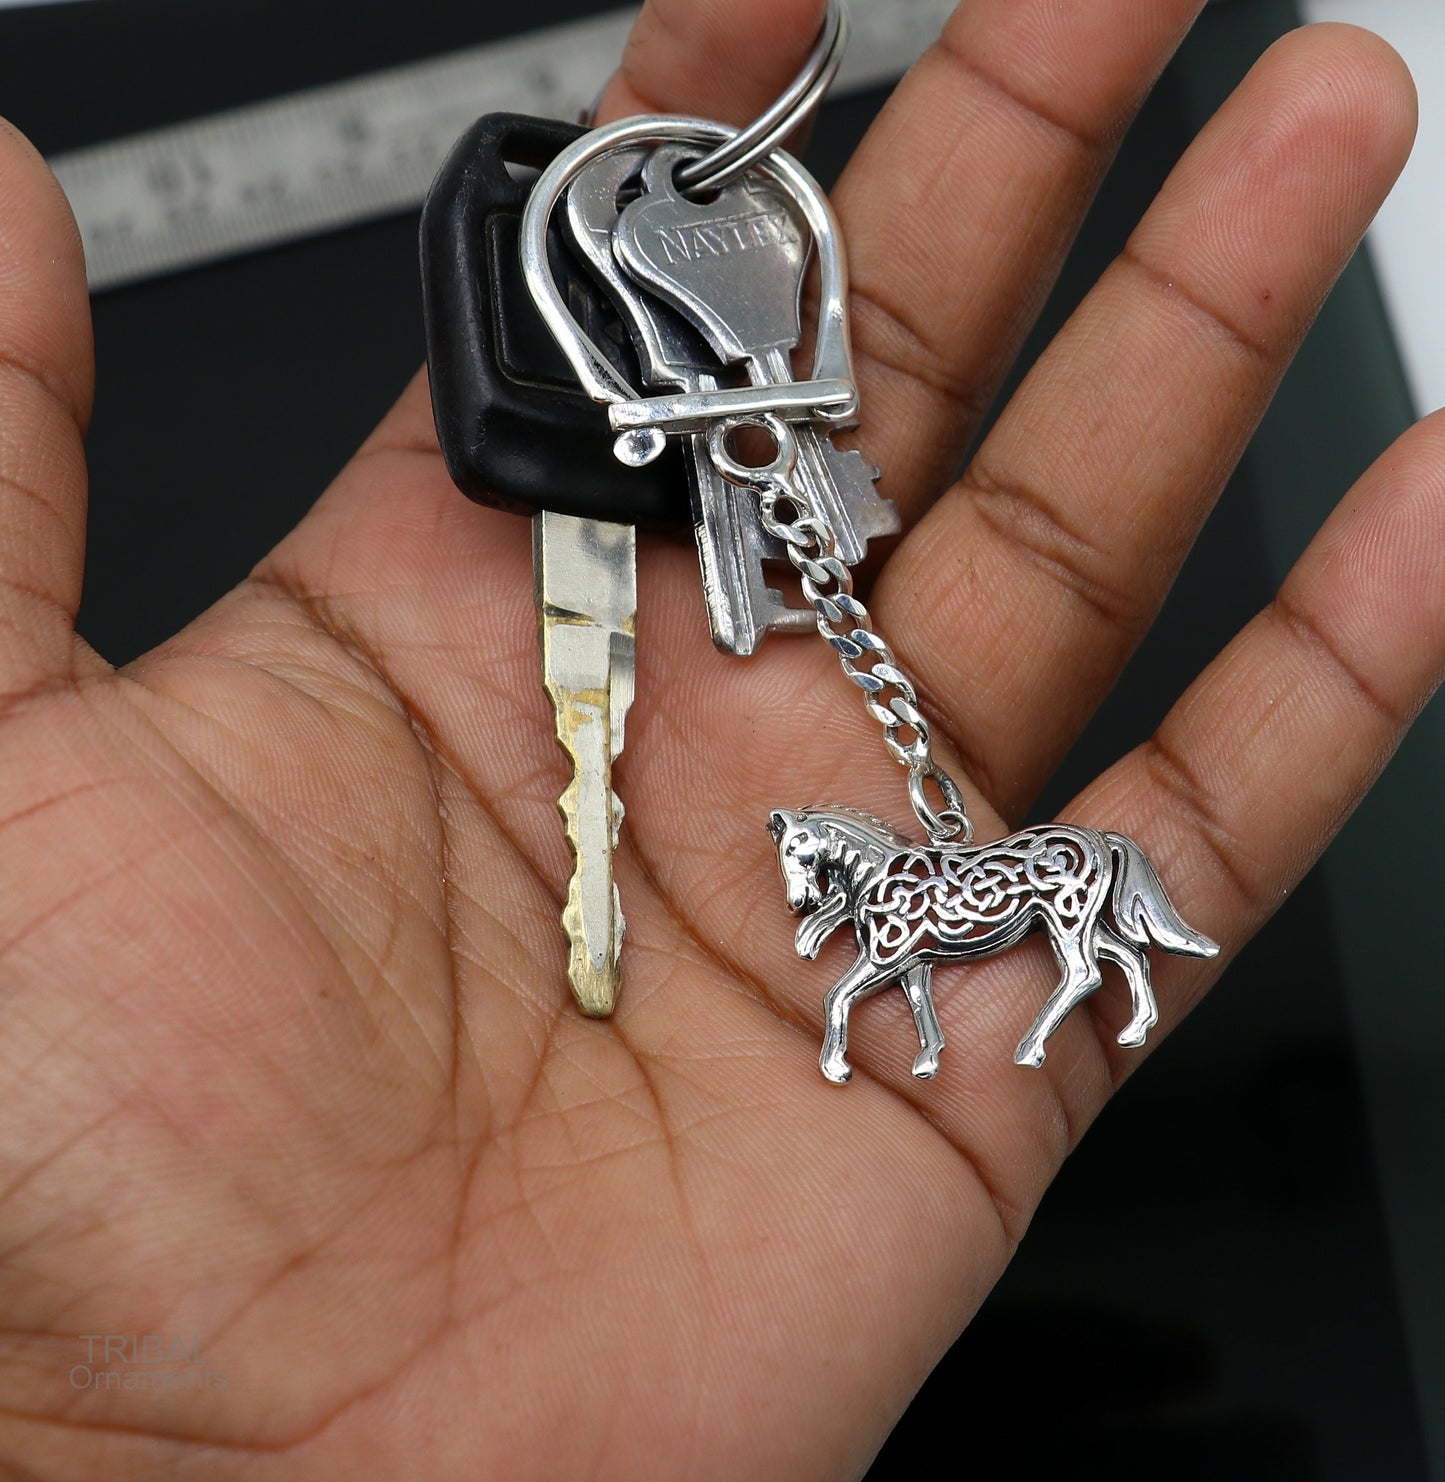 925 Sterling silver handmade unique vintage horse design solid key chain, stylish royal gifting silver accessories unisex gift kch11 - TRIBAL ORNAMENTS